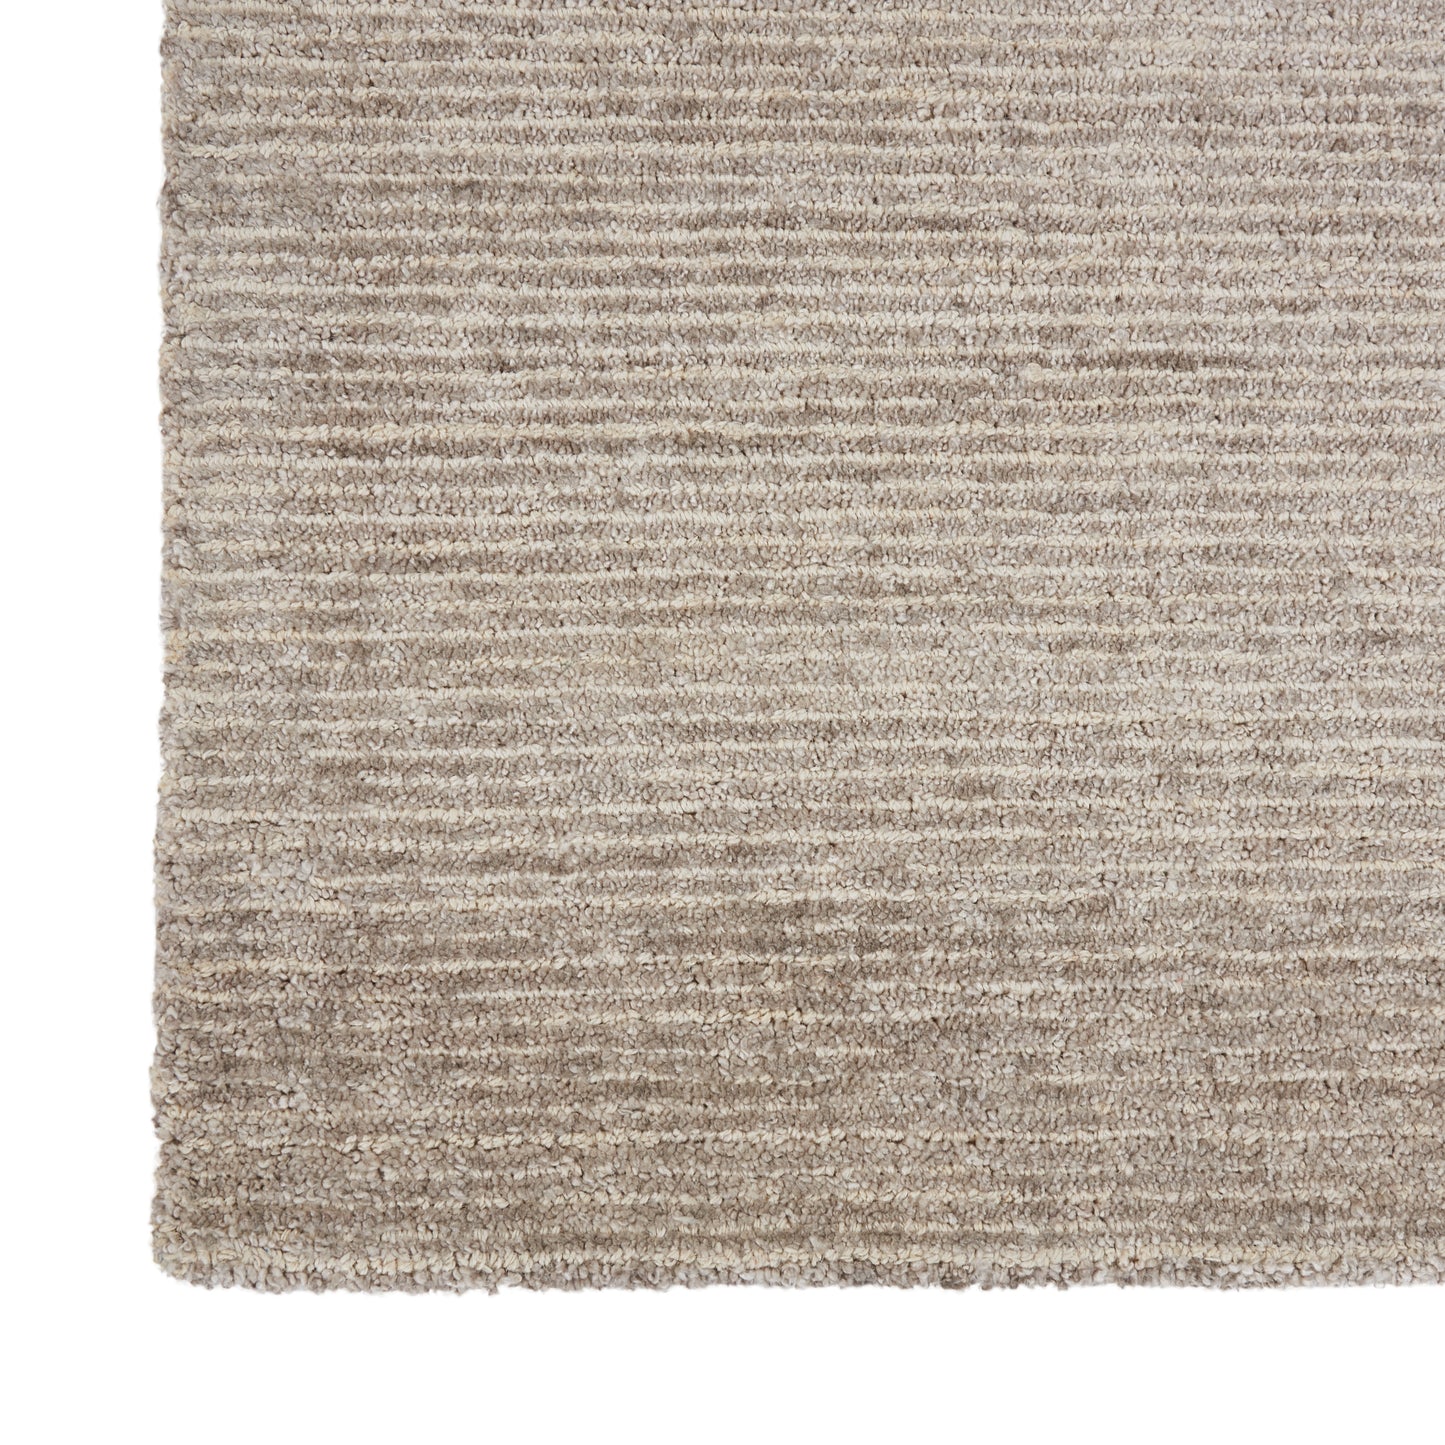 Nourison Home Weston WES01 Oatmeal  Contemporary Tufted Rug